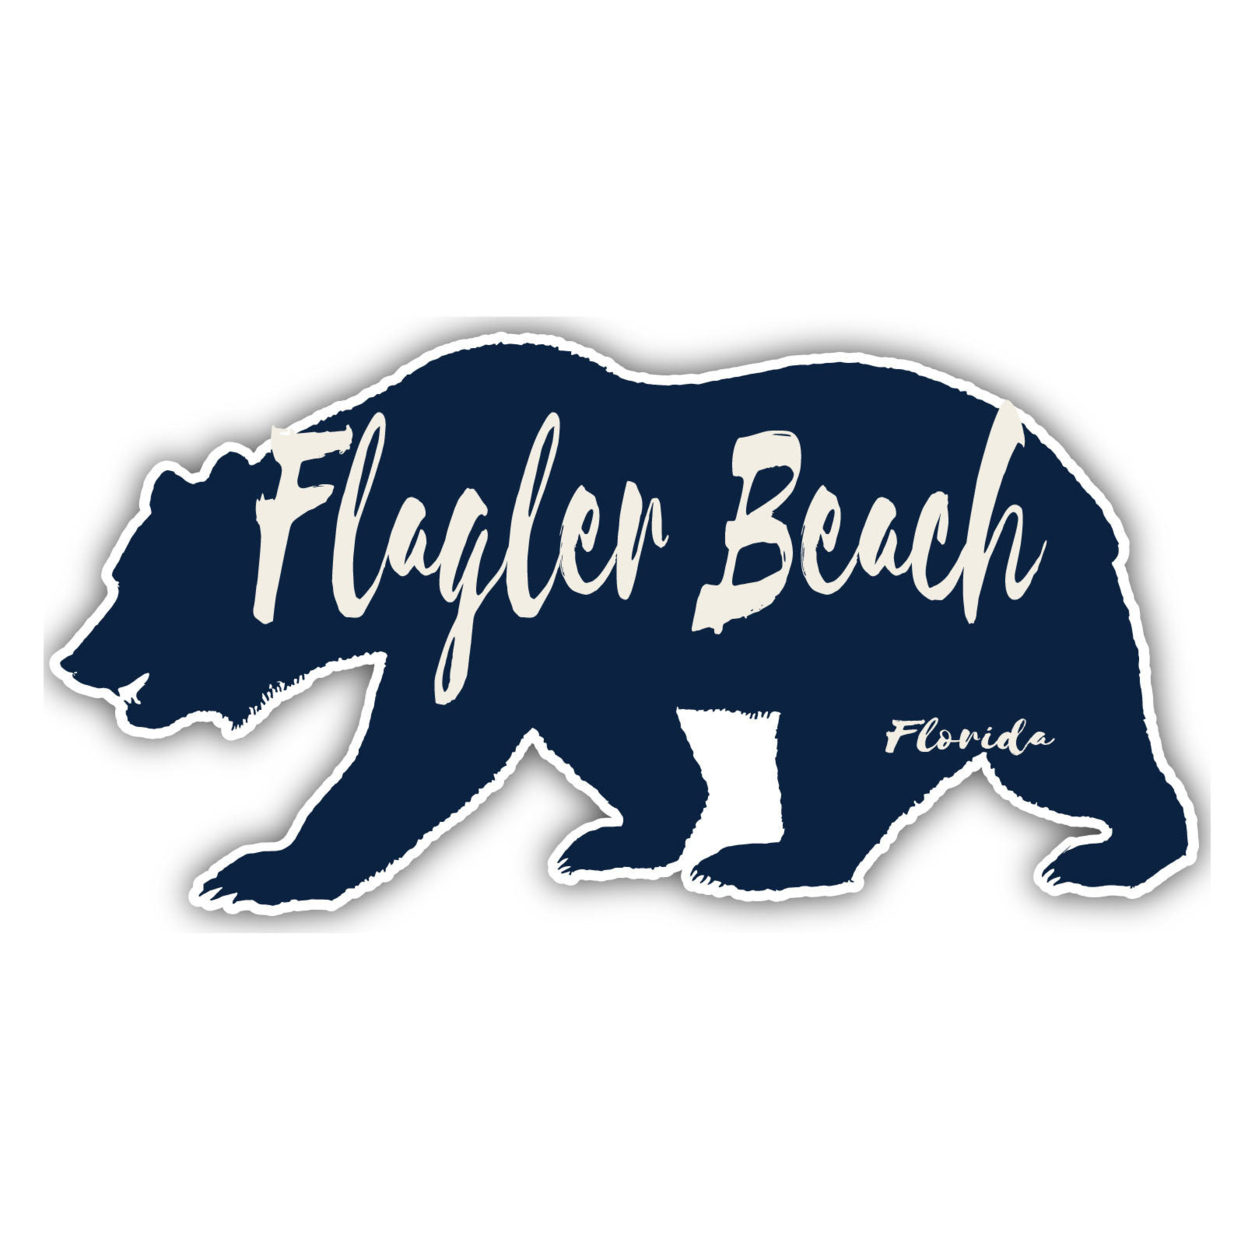 Flagler Beach Florida Souvenir Decorative Stickers (Choose Theme And Size) - 4-Pack, 12-Inch, Tent